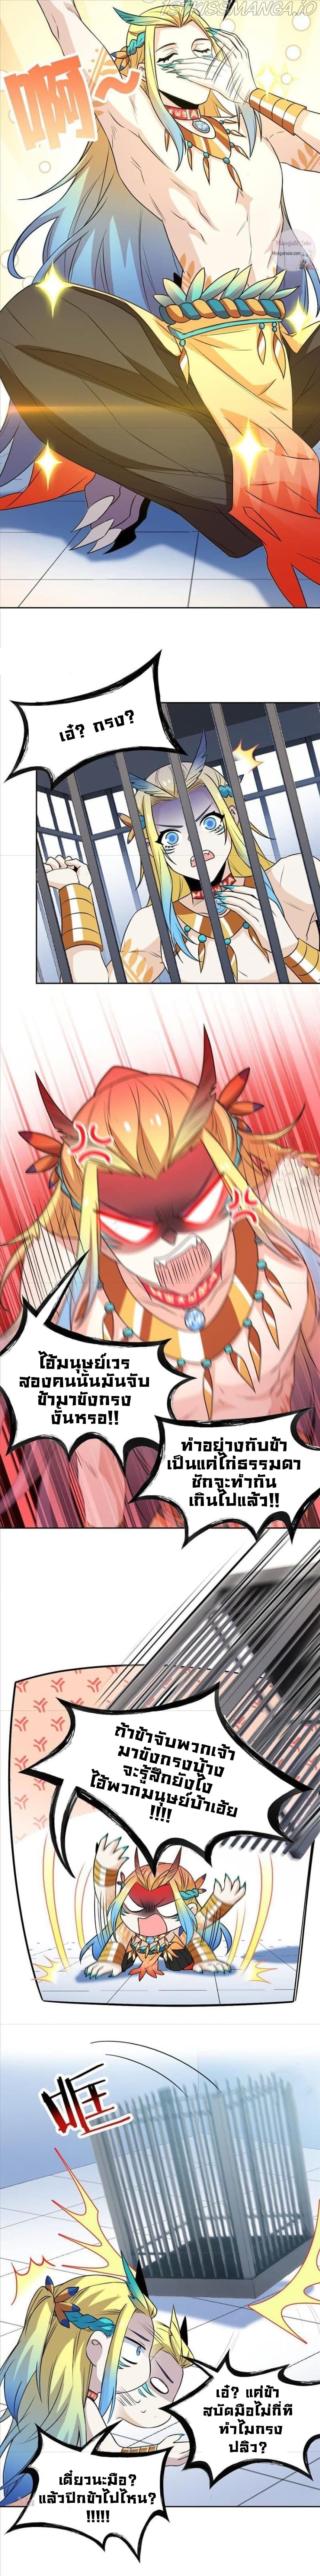 The Strong Man From The Mental Hospital 101 แปลไทย